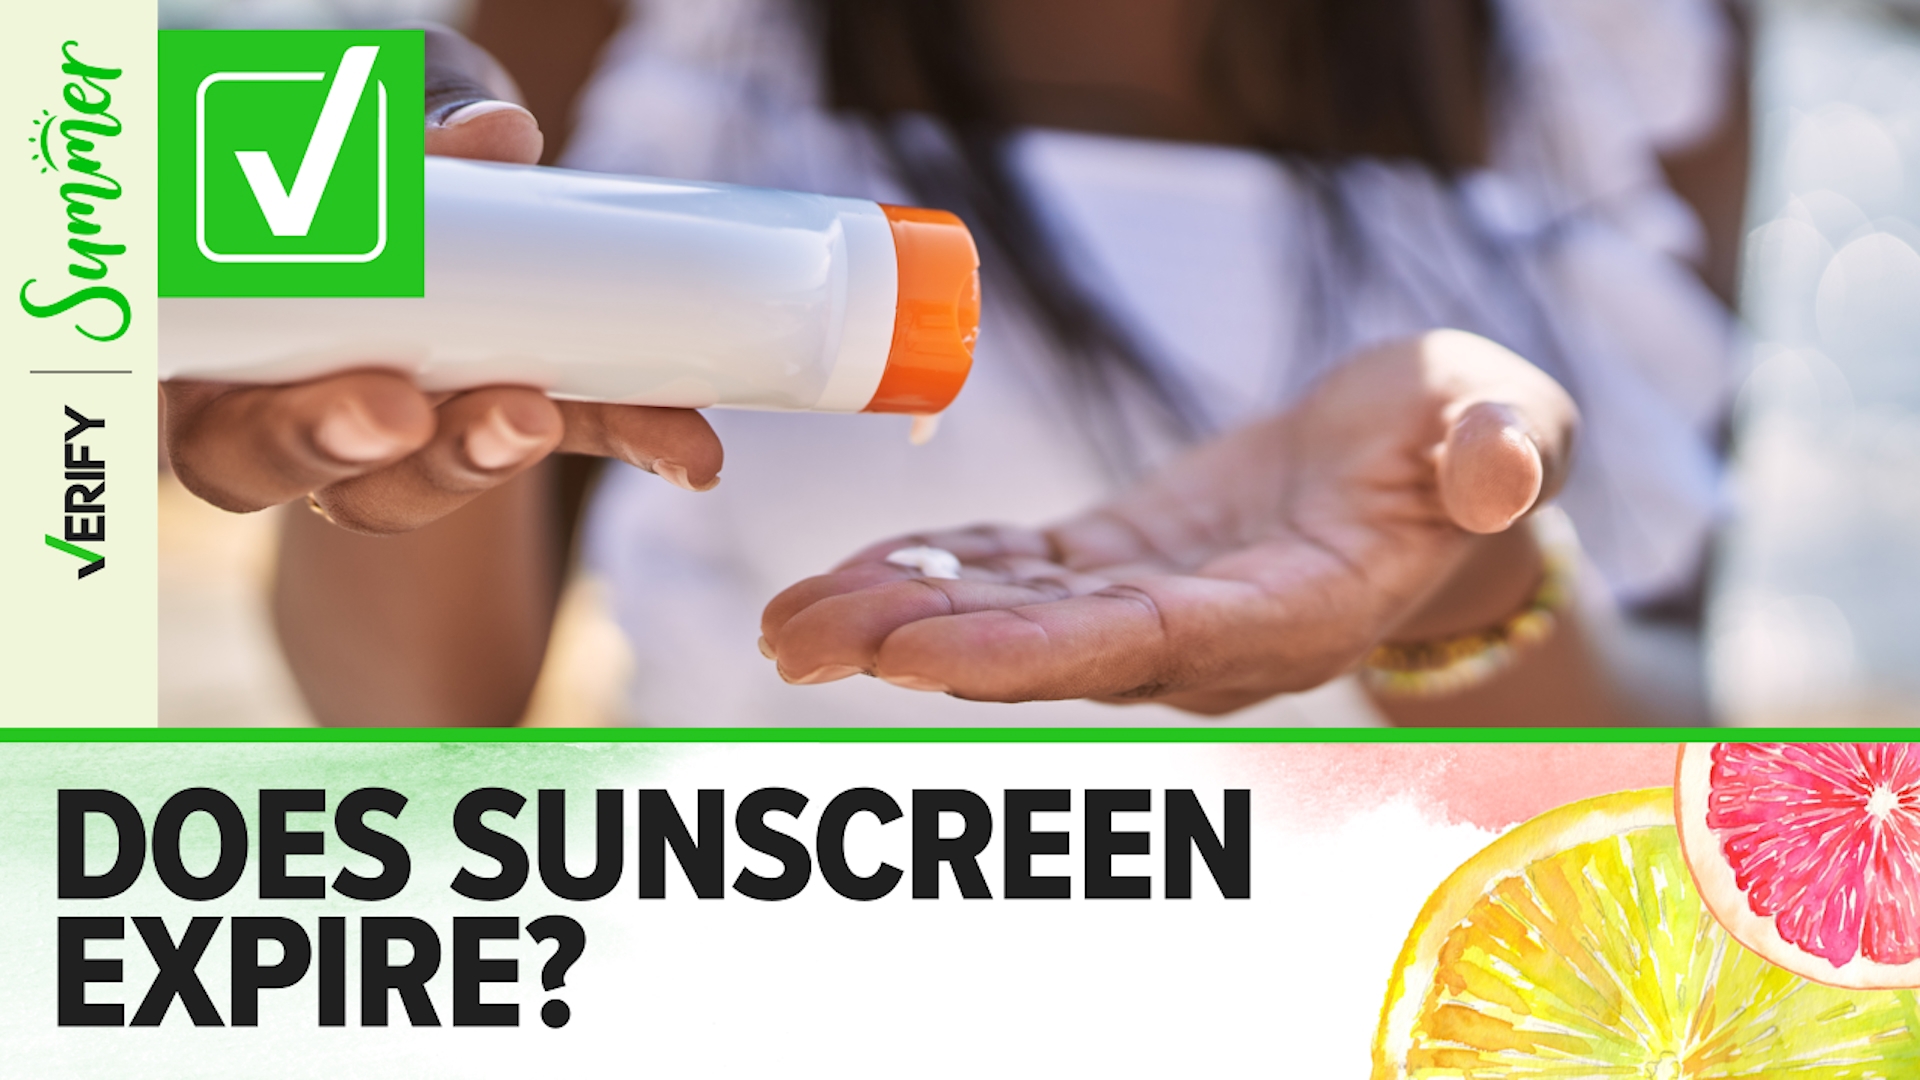 Does sunscreen expire? Here’s what we can VERIFY.